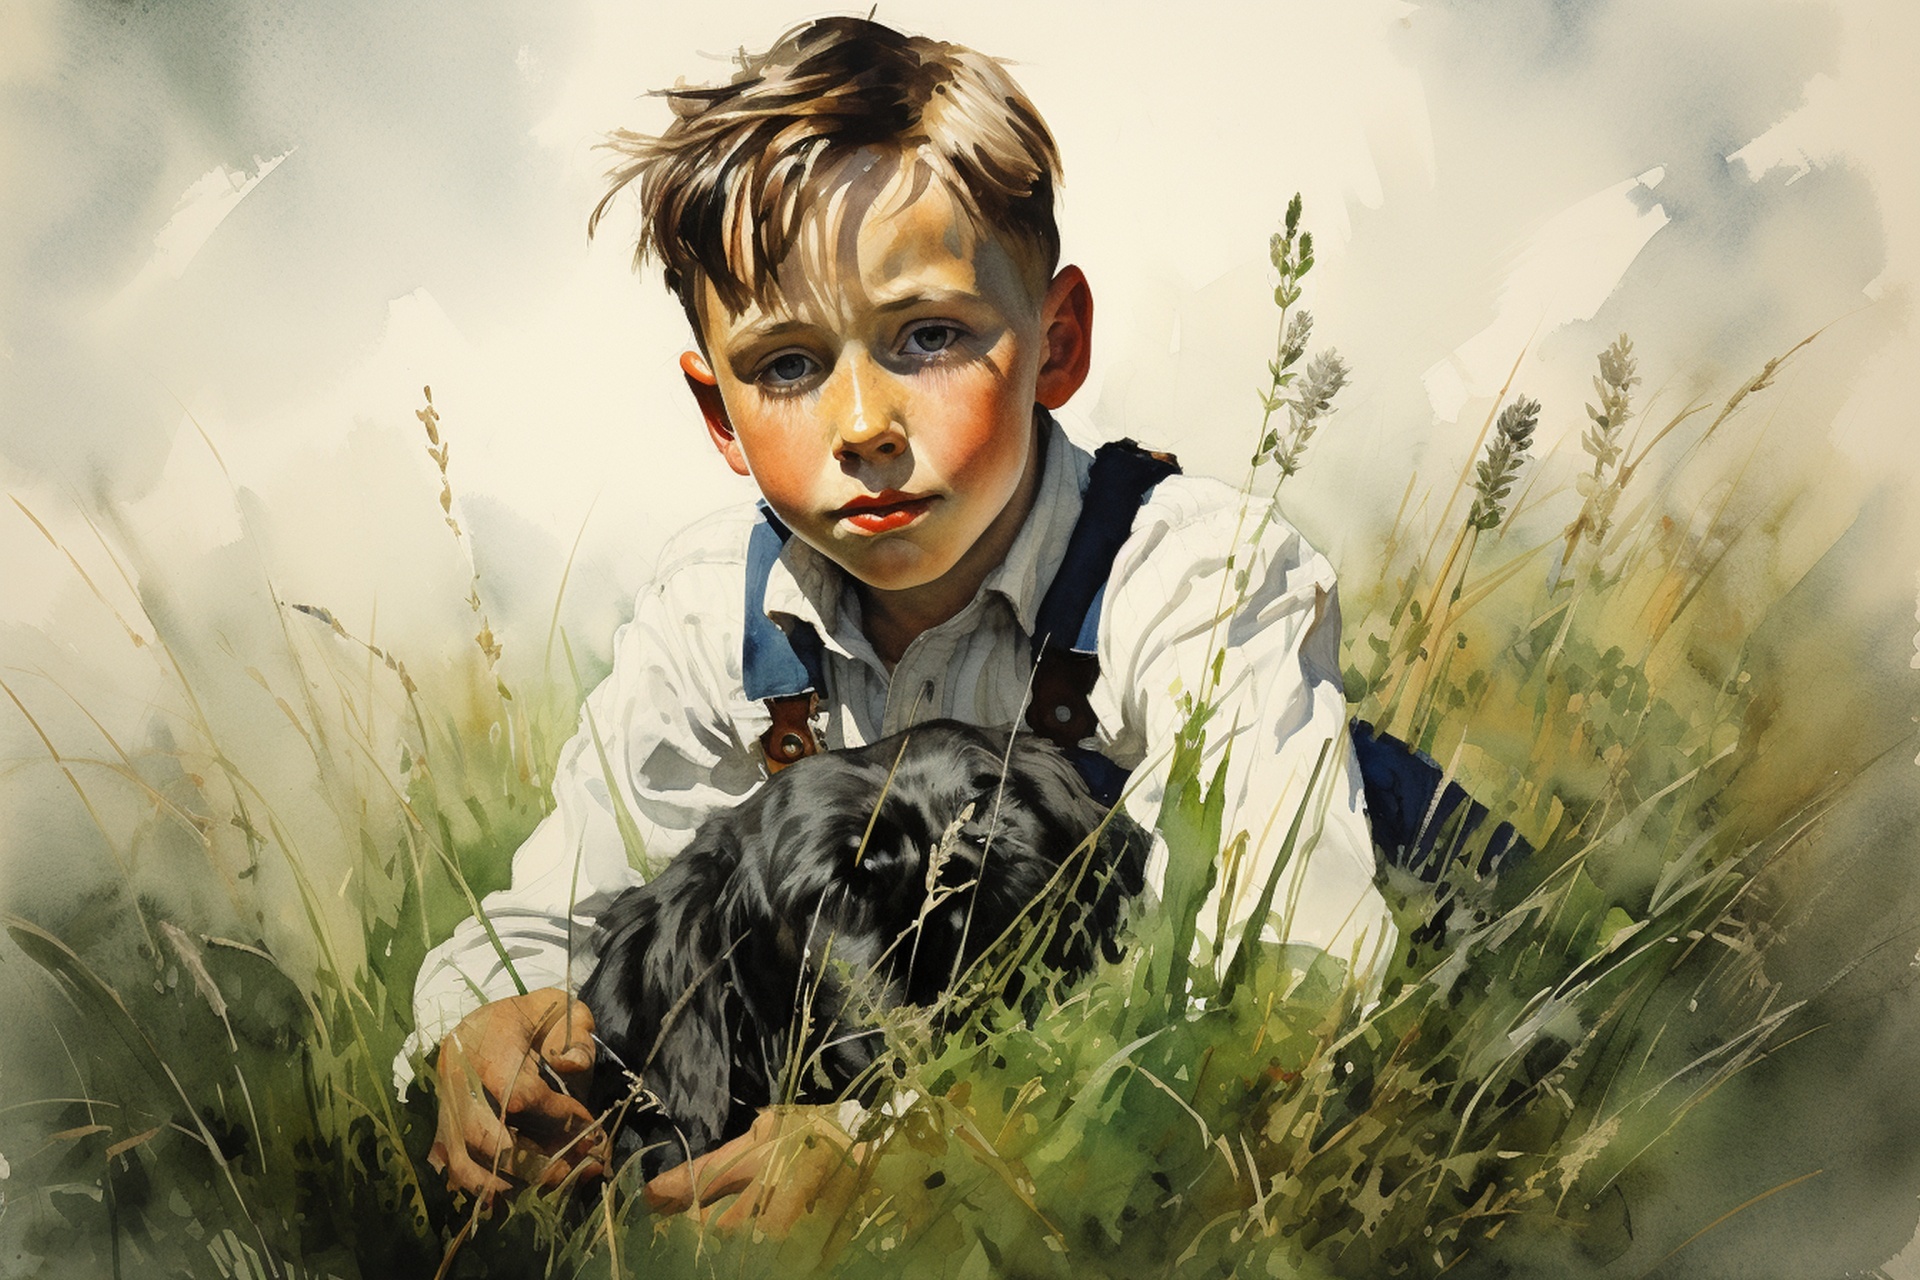 Young boy with his dog